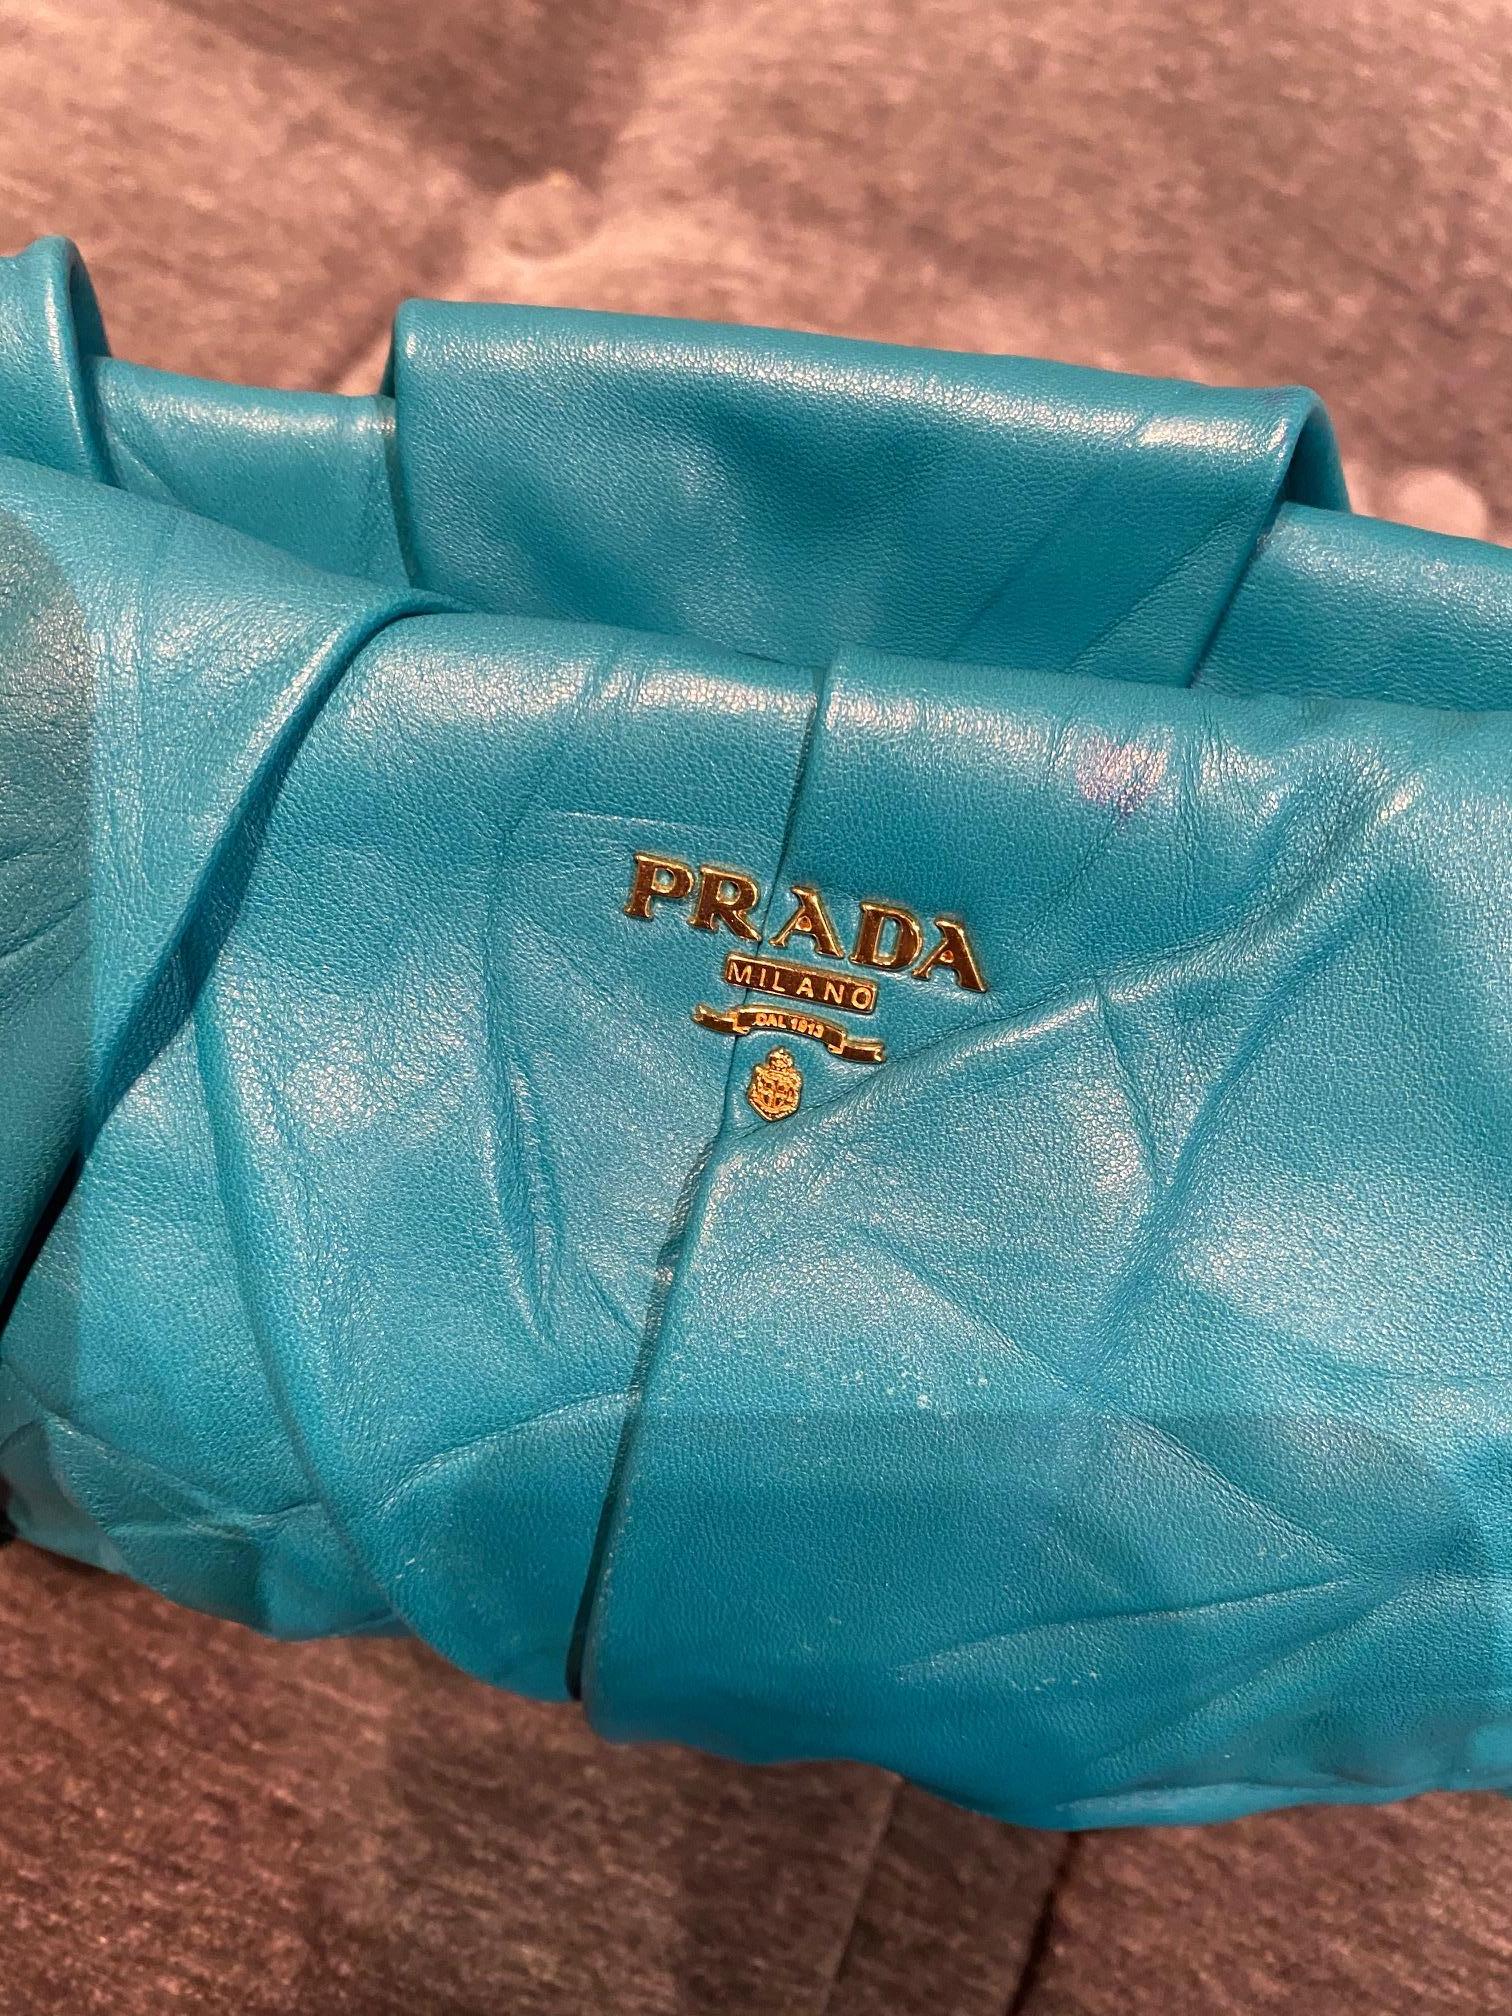 Prada Pleated Leather Clutch With Tags For Sale 1